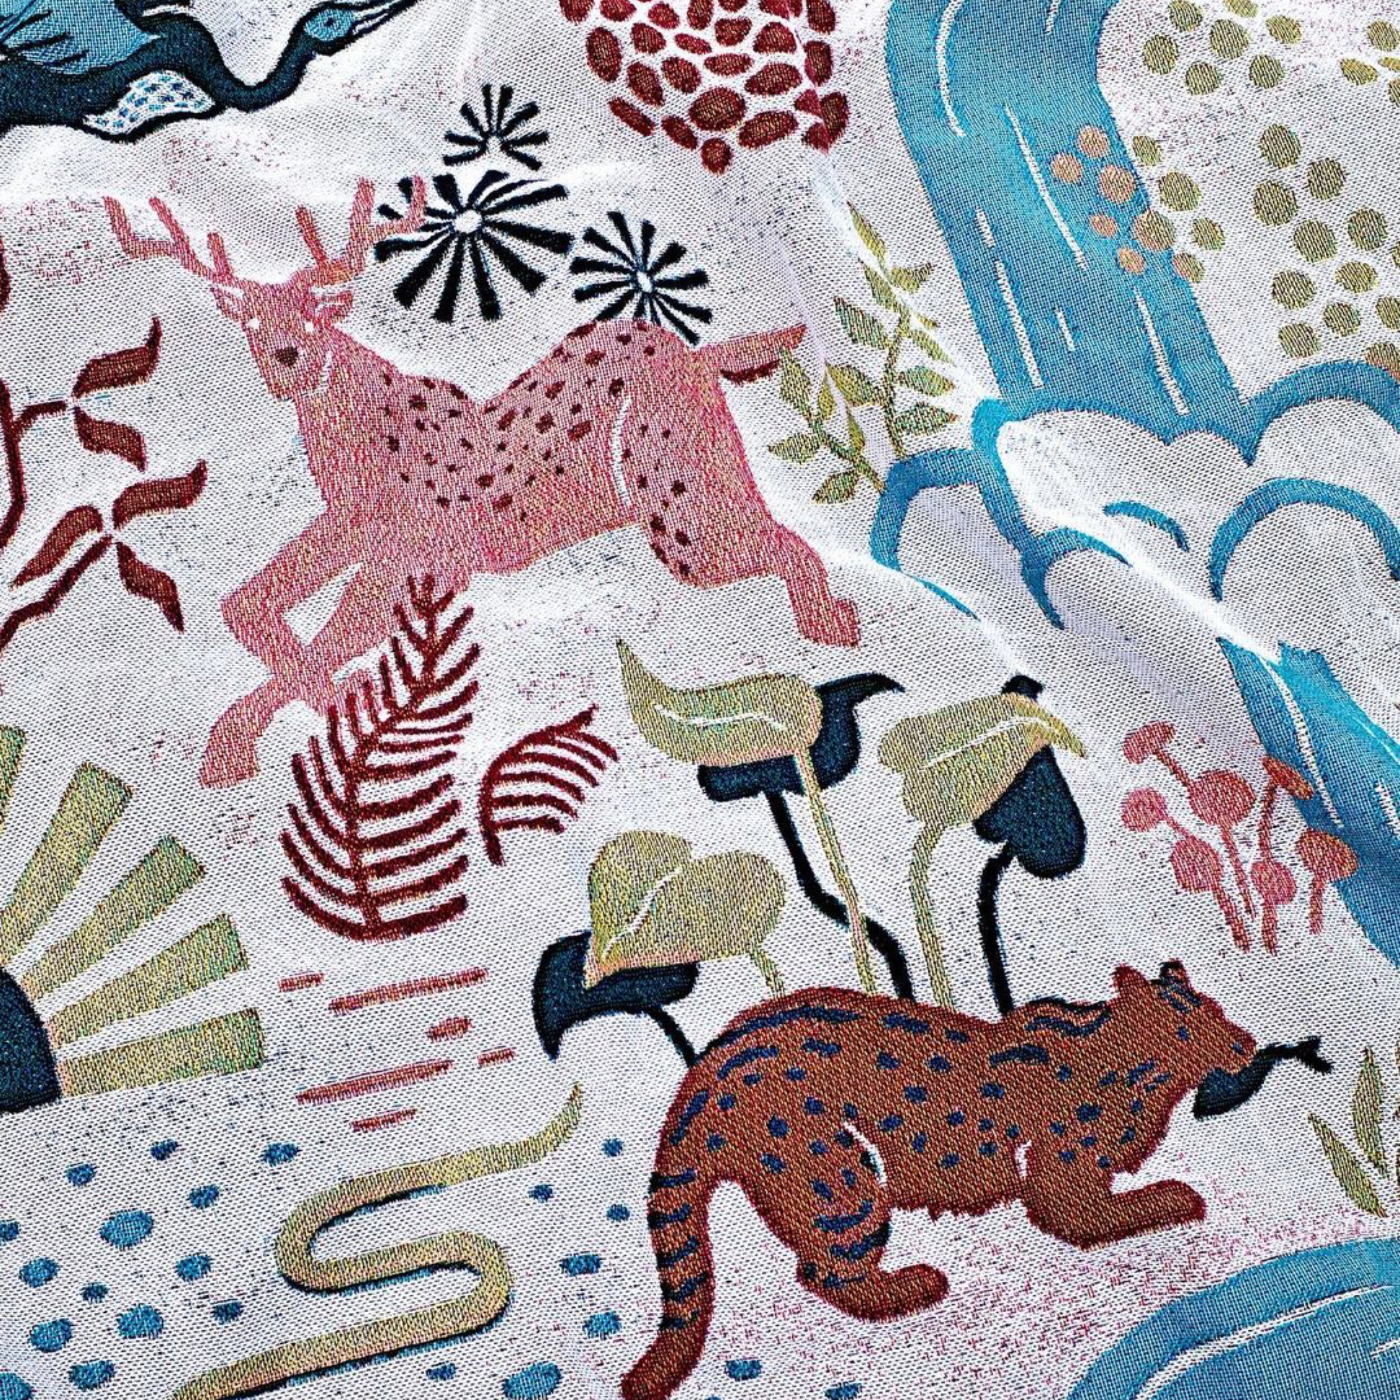 A close up of a throw blanket showing a section with a cream background, a pink deer, a stream of blue water coming from the top right side, a small brown animal with a black fish in its mouth, green leaves and more.